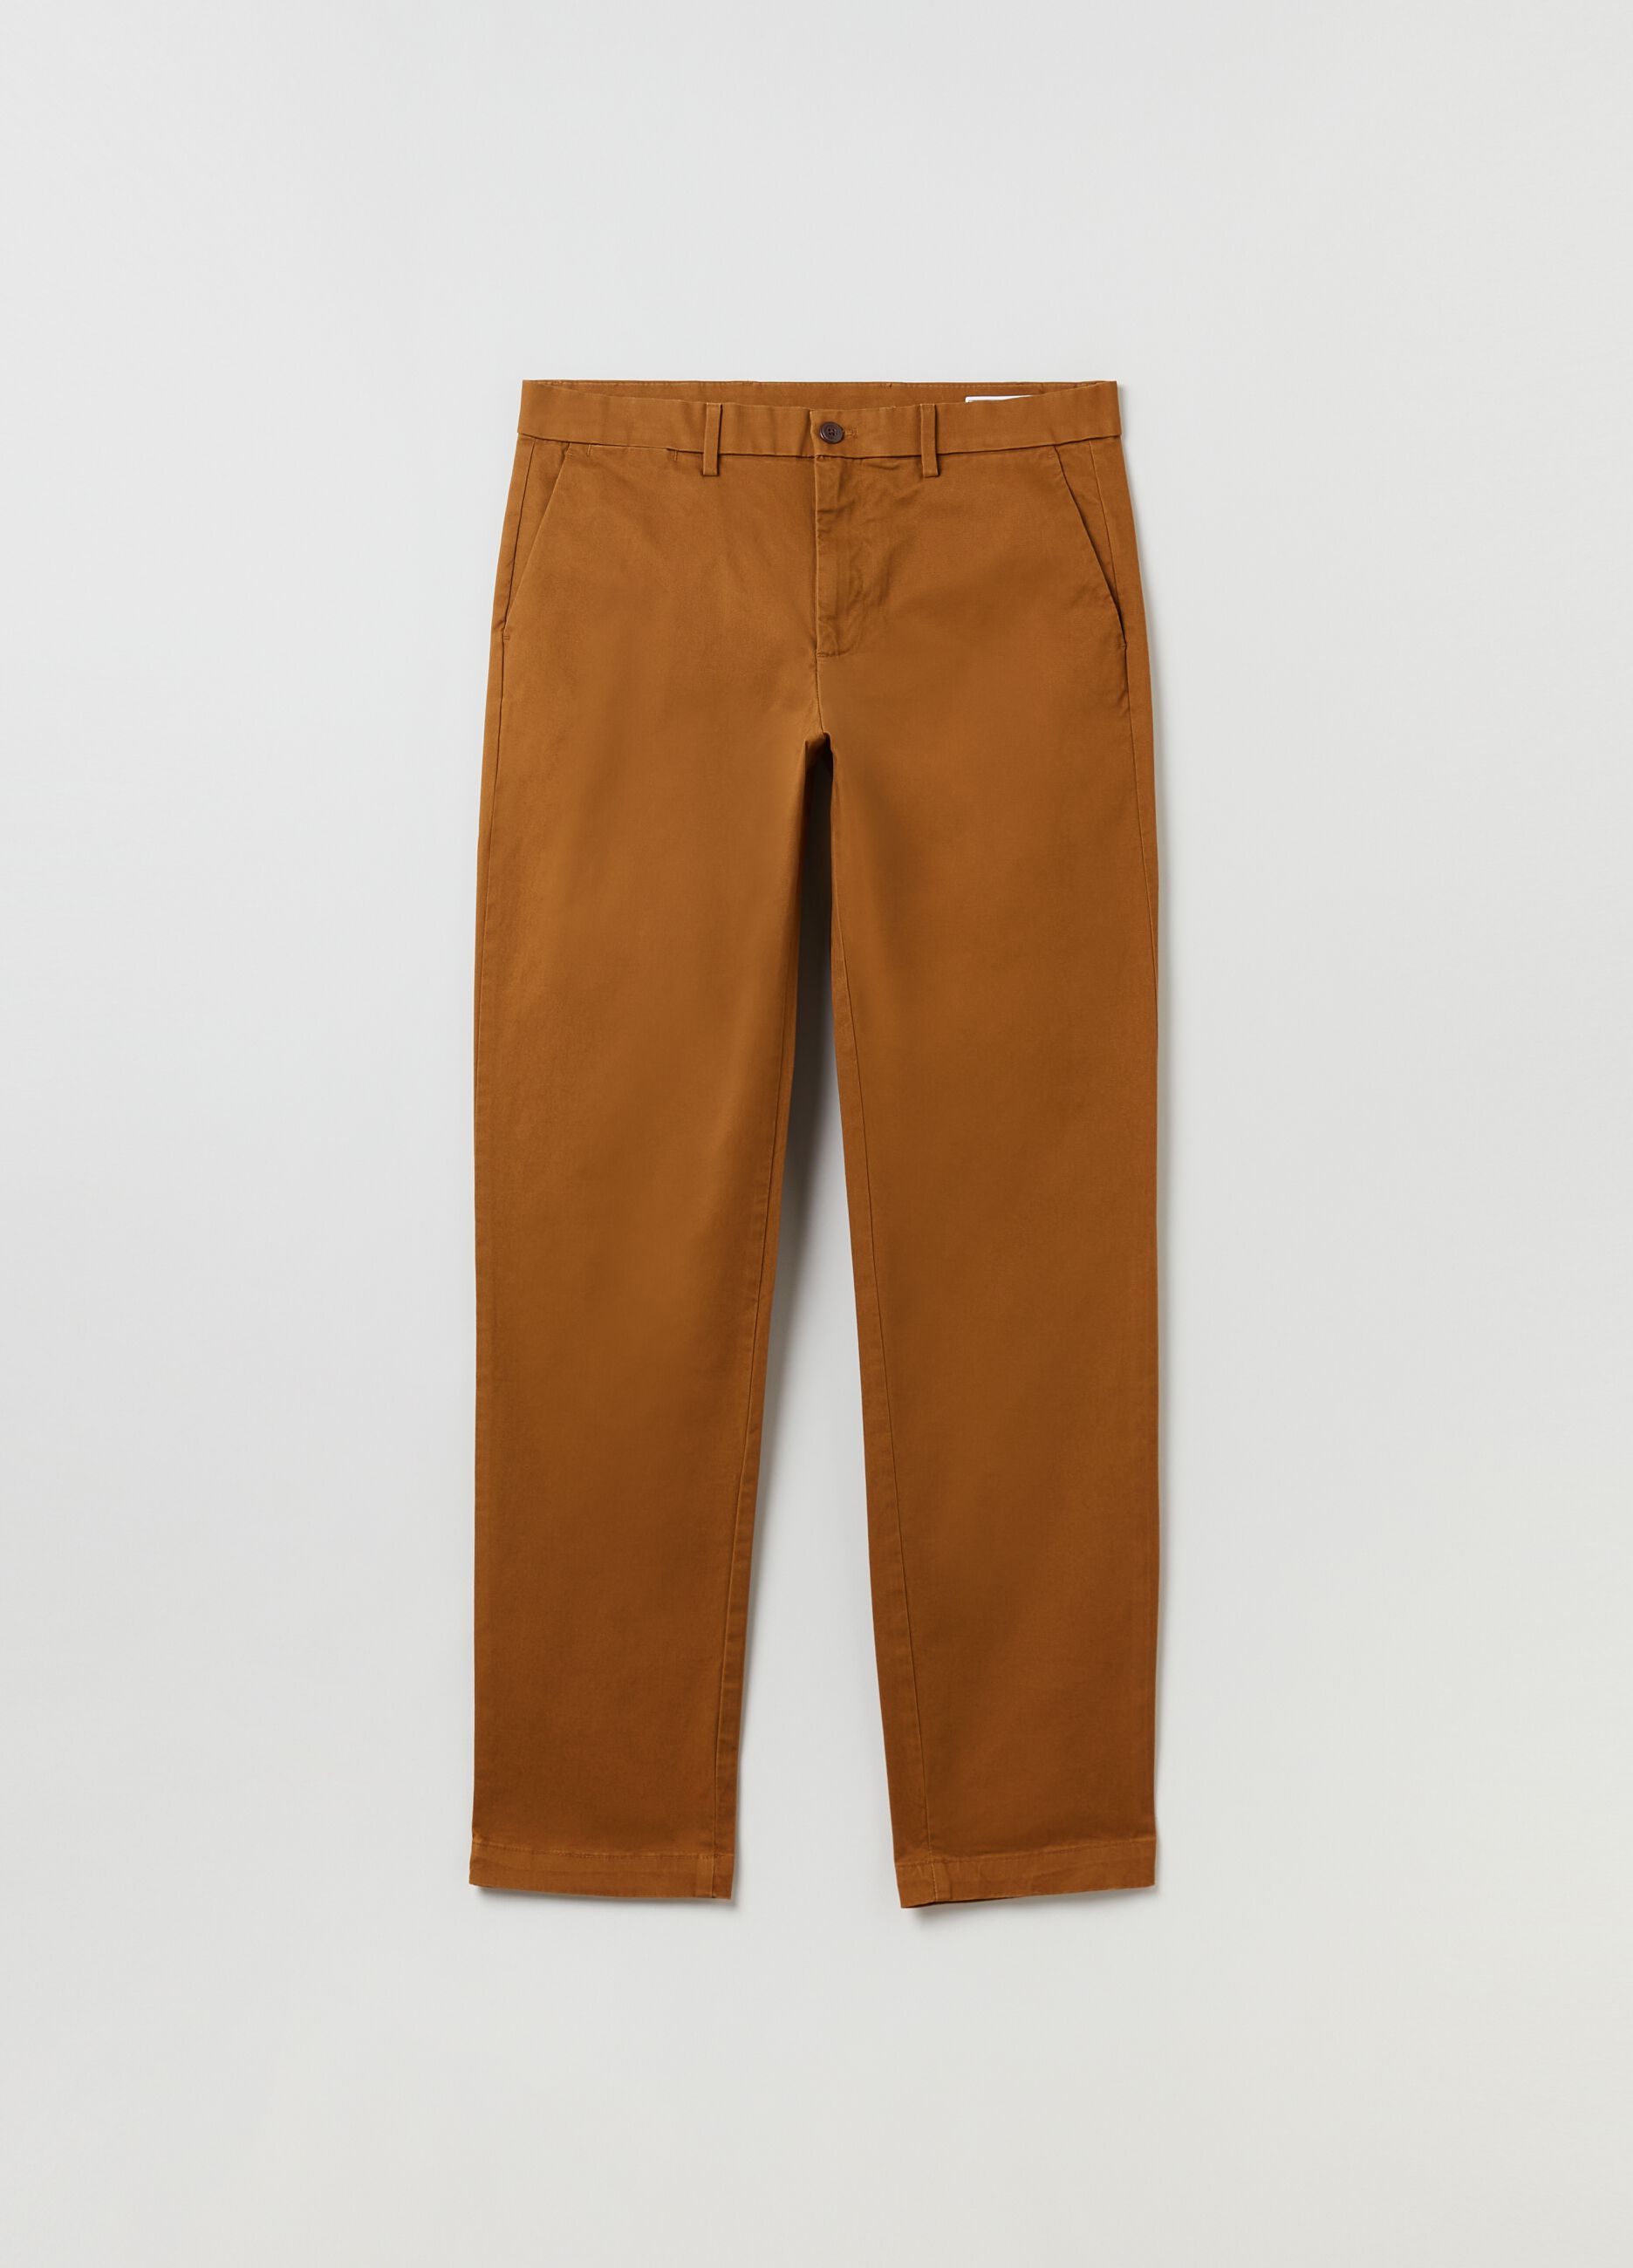 Slim fit, stretch cotton trousers